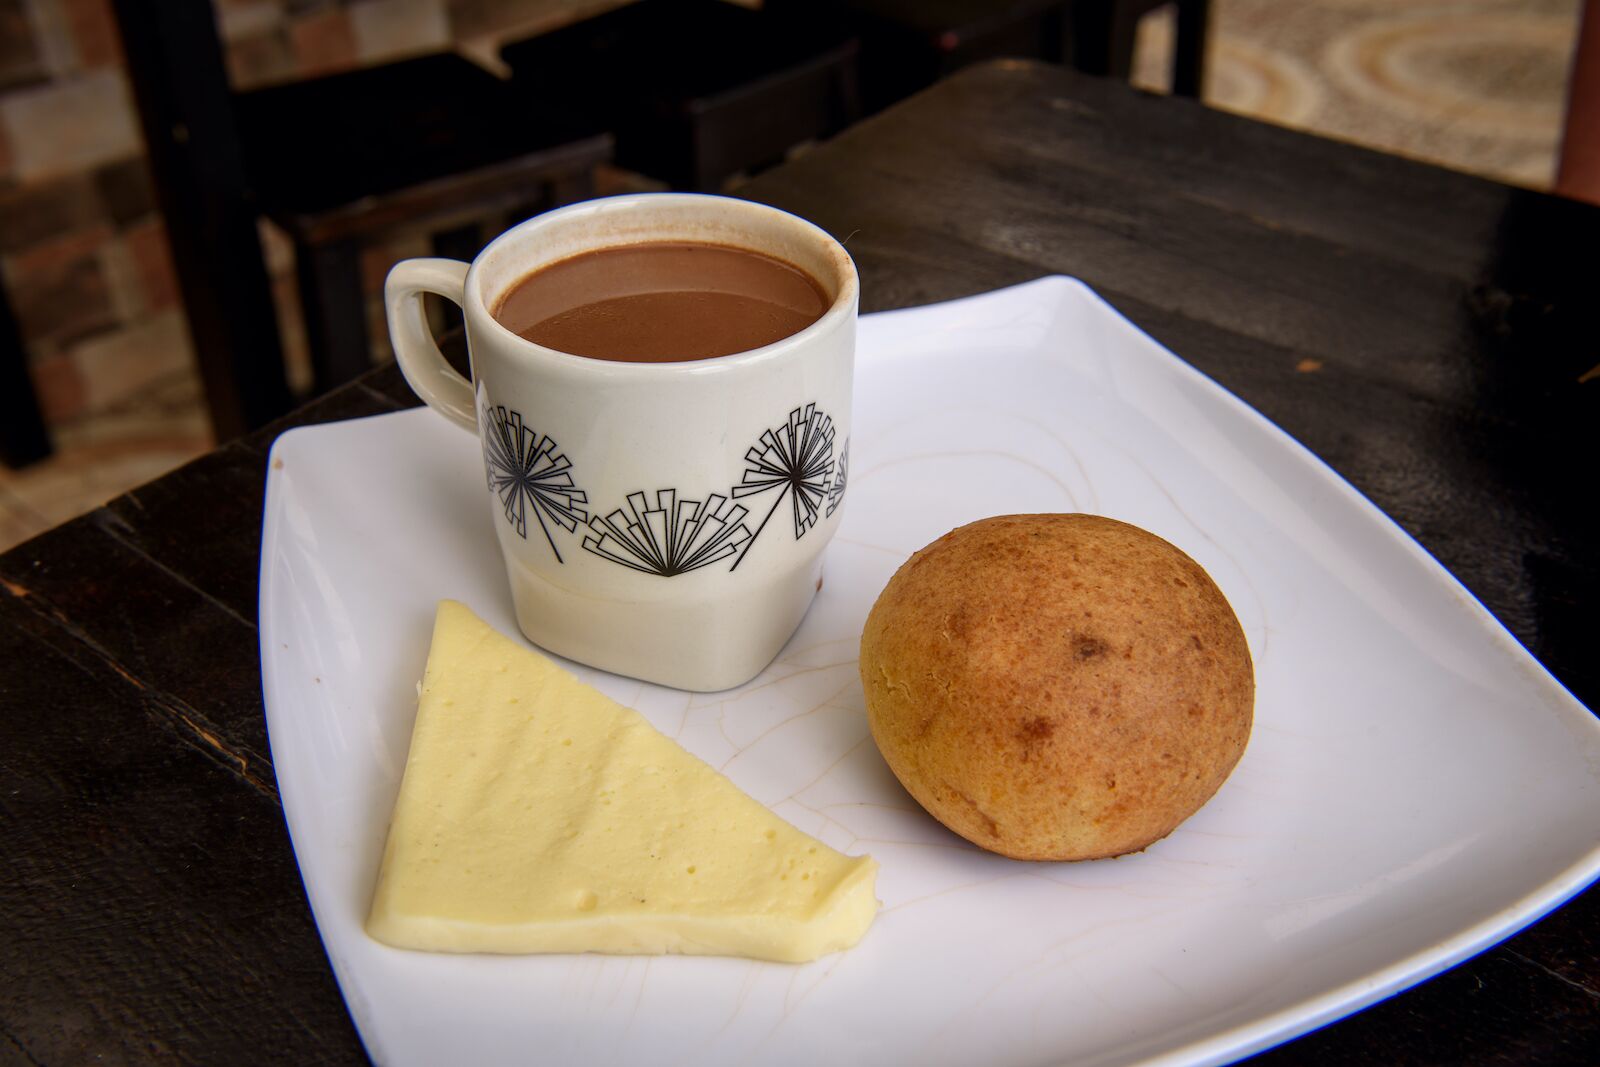 A type of Colombian breakfast food called almojabana, a bread roll served with a slice of cheese and a cup of hot chocolate